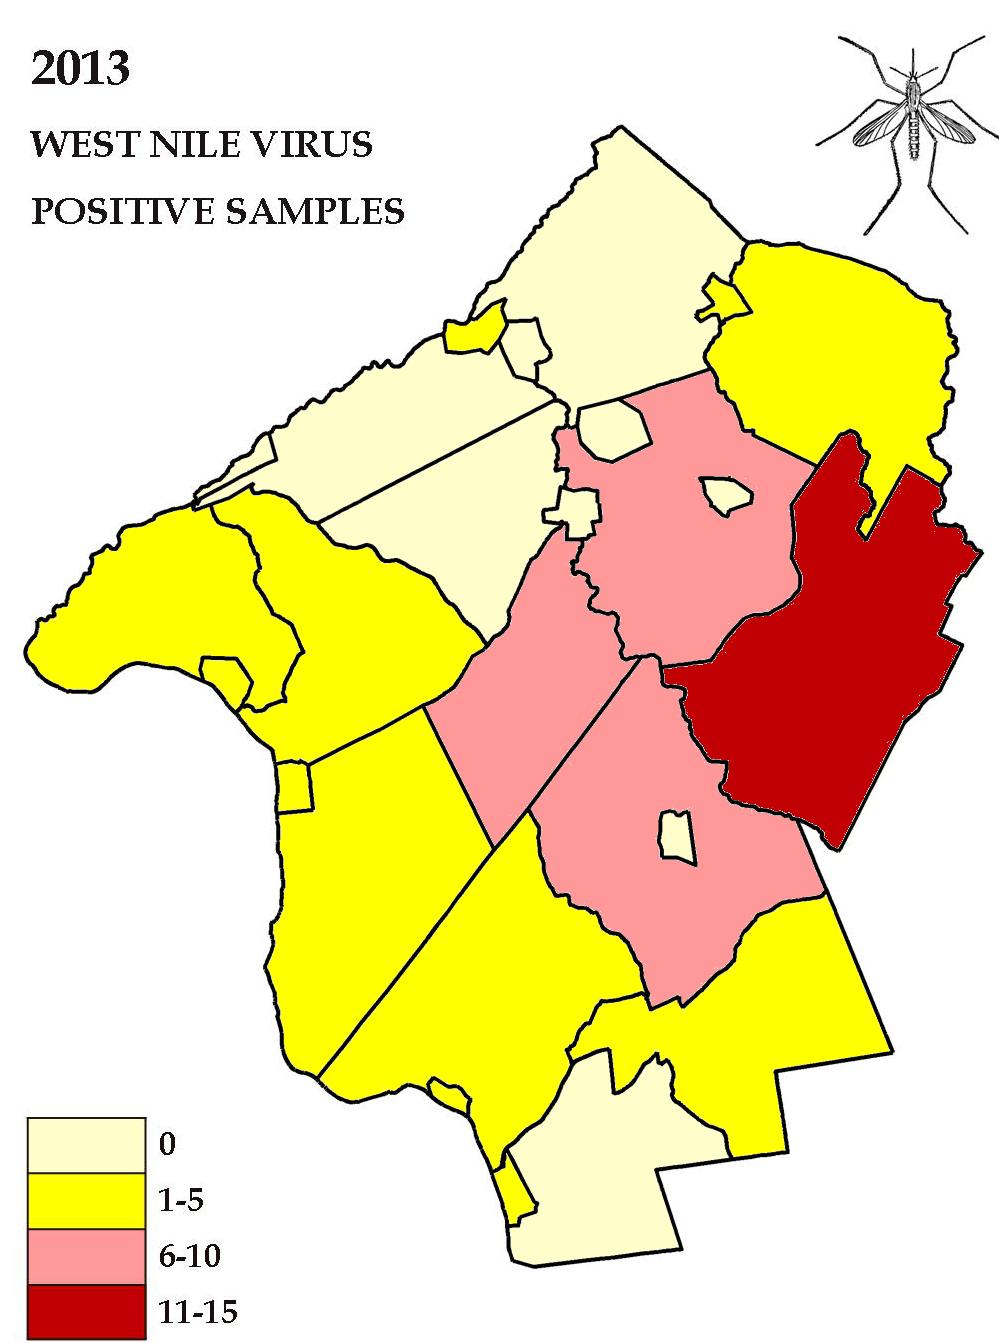 Mosquito Surveillance Activities from 2008-2013 in Hunterdon County 2008 2009 2010 2011 2012 2013 # Traps Set 1,654 1,210 1,317 1,160 1,591 1,672